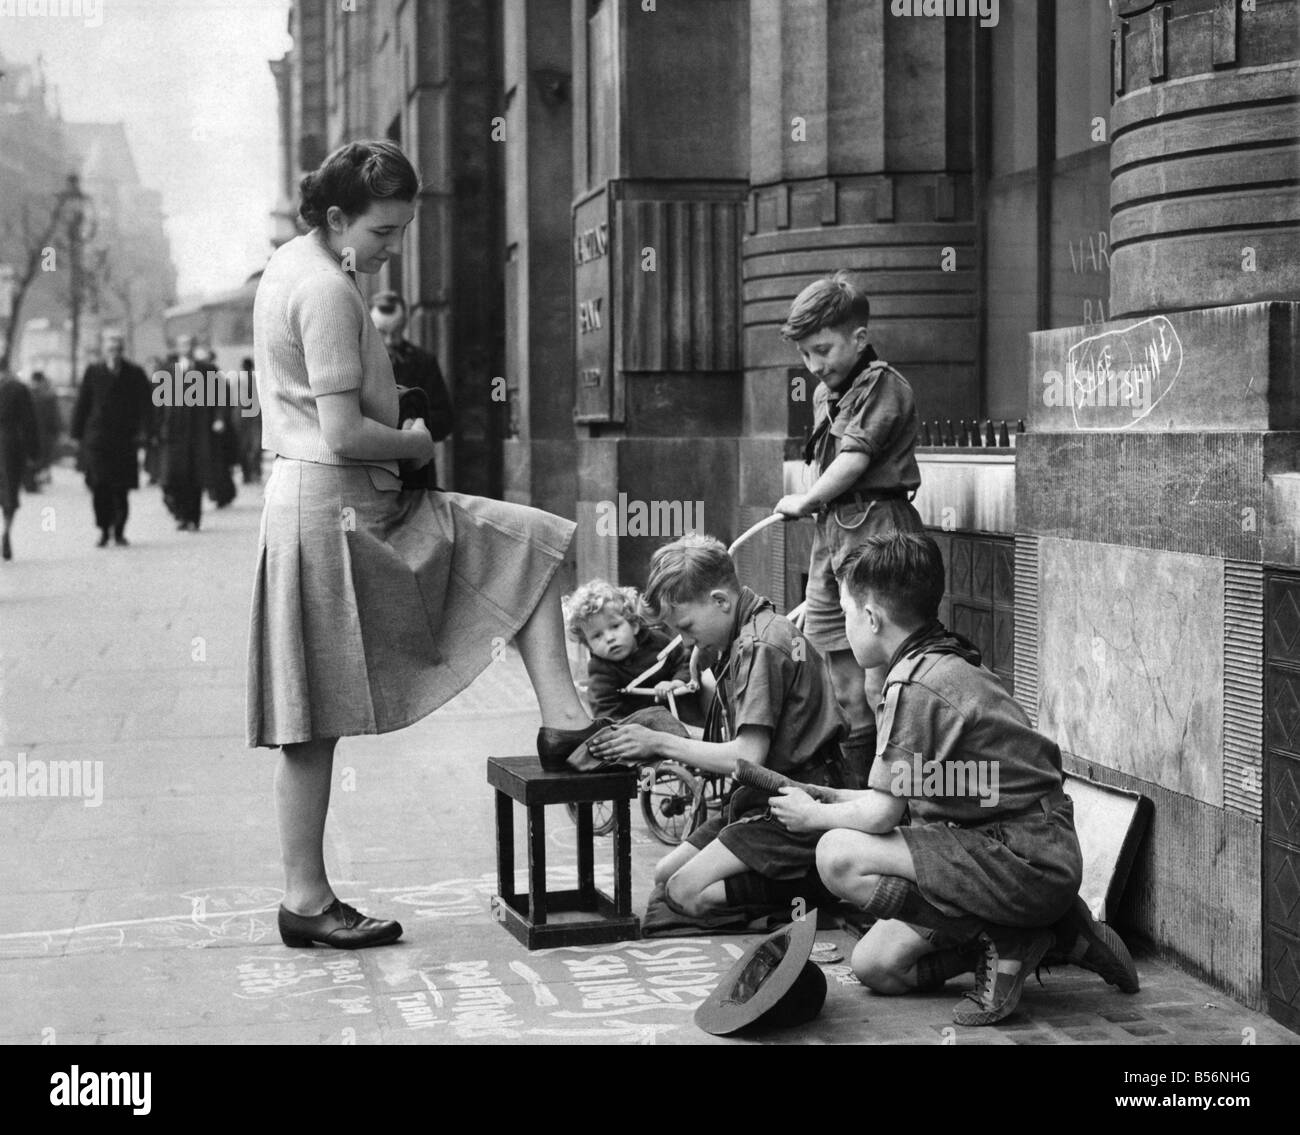 Bob a Job. Three scouts, Left to right, Dennis Hunter, aged 12, Ronald Dury, aged 12, polishing shoes and his twin brother Raymond, with brush in hand took up a profitable site in Kingways to help their cause. This morning, starting at 9.30 am. until 12.30 p.m., the three scouts took £1, 12s. 3d. for their morning's work and 19/6d. during the first two hours of their afternoon duty. The Dury twins, to add colour to their cause brought their youngest brother, Eric, aged 2 along with them for the day. P009995 Stock Photo